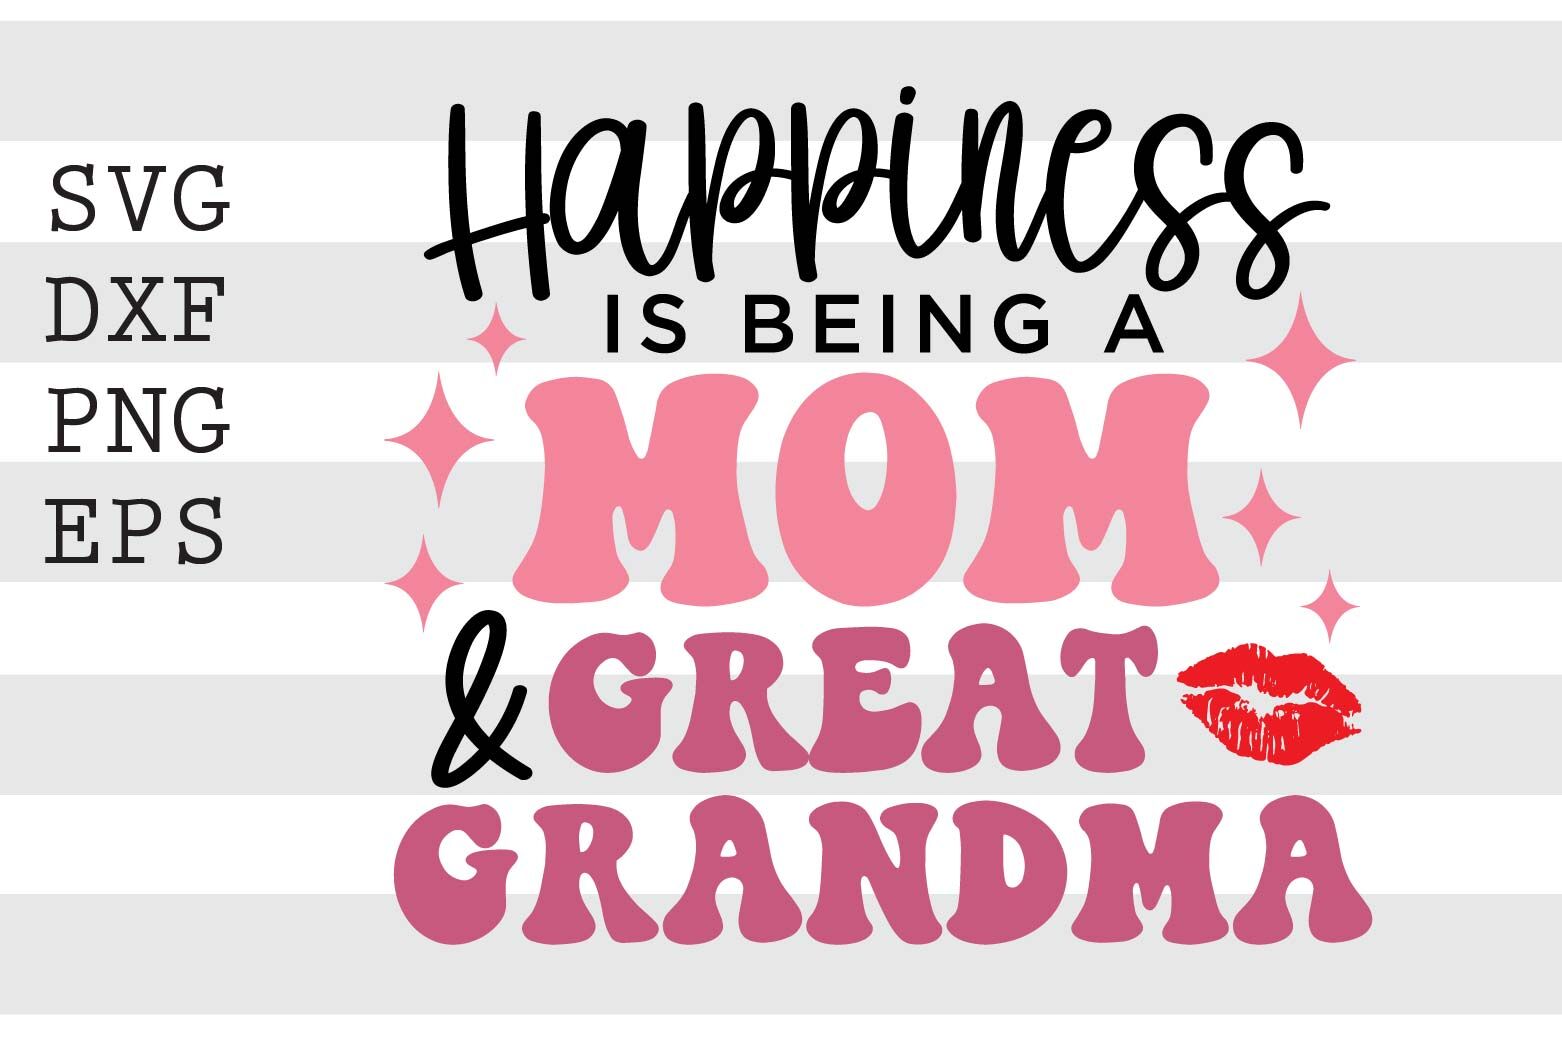 Happiness is being a mom & great grandma SVG By spoonyprint